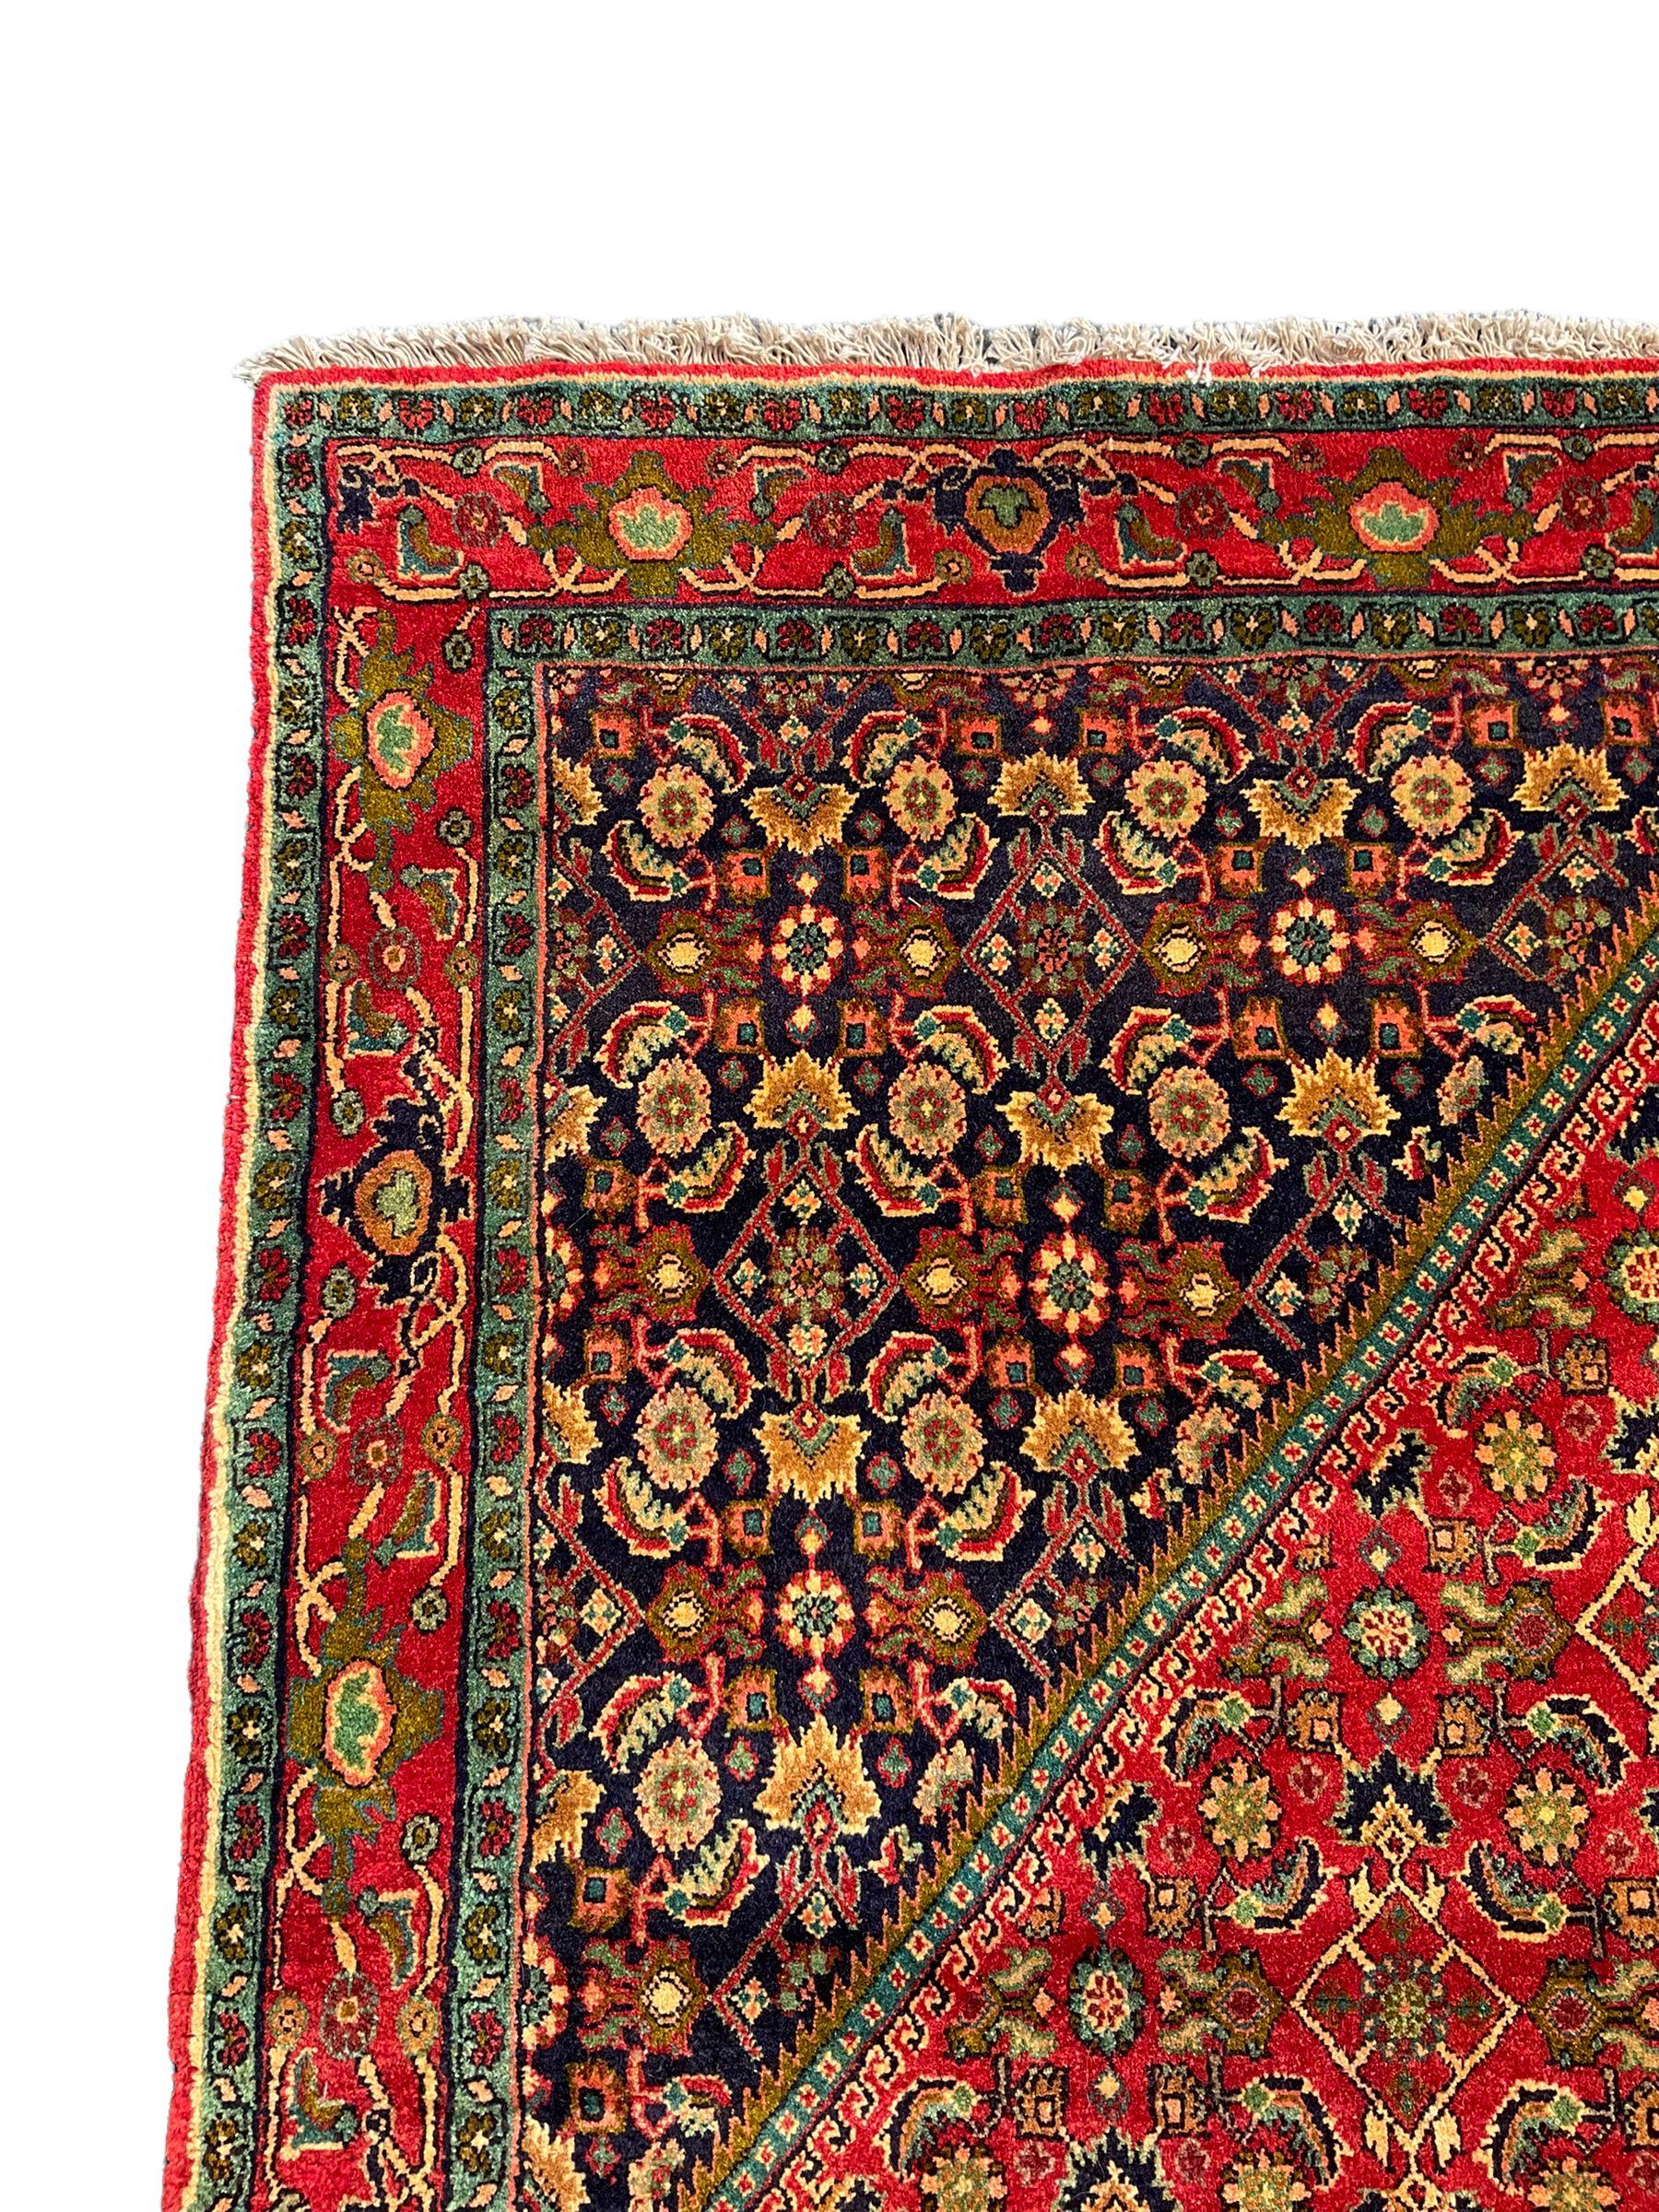 Persian Bijar red and blue ground rug - Image 3 of 6